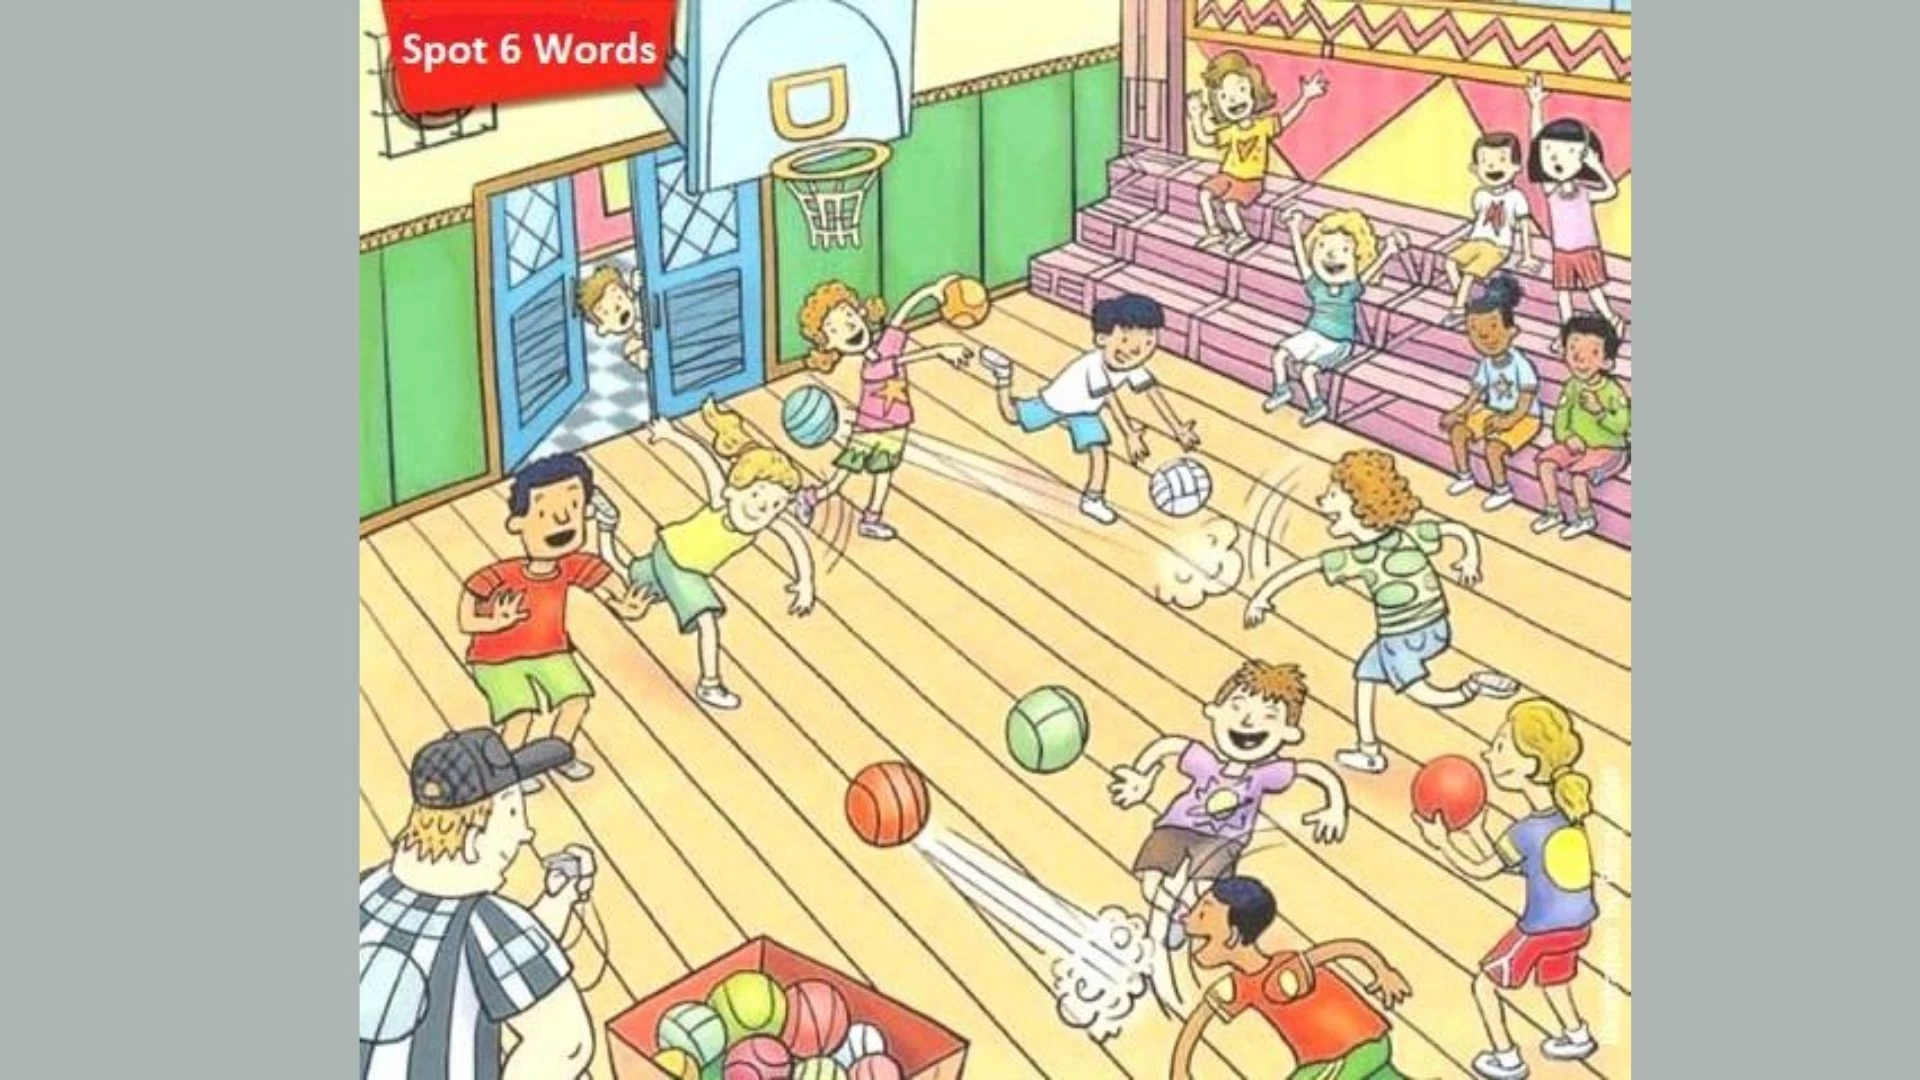 Can you spot 6 Hidden words in the Basketball Court Picture within 10 secs?